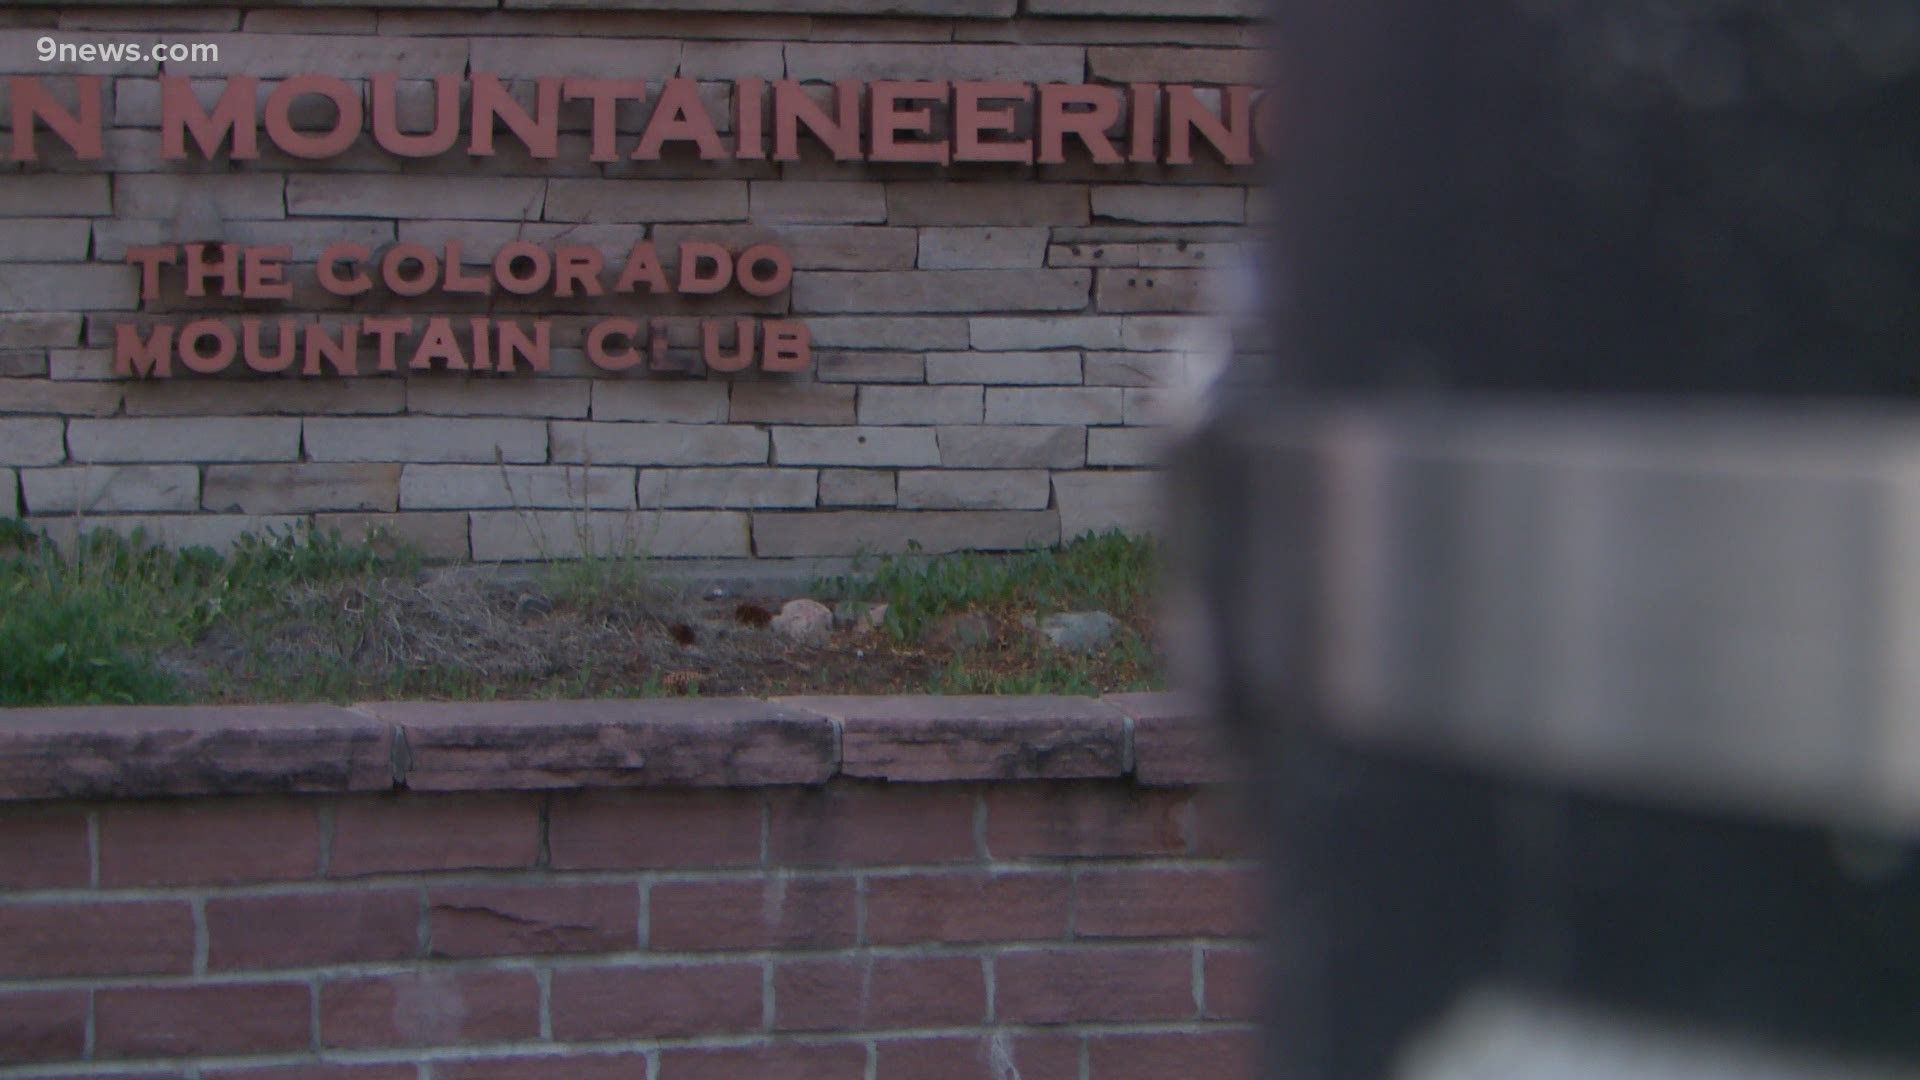 The victims and police said Chun Min Chiang used hidden cameras in various locations, inside the offices of the Colorado Mountain Club where he worked.